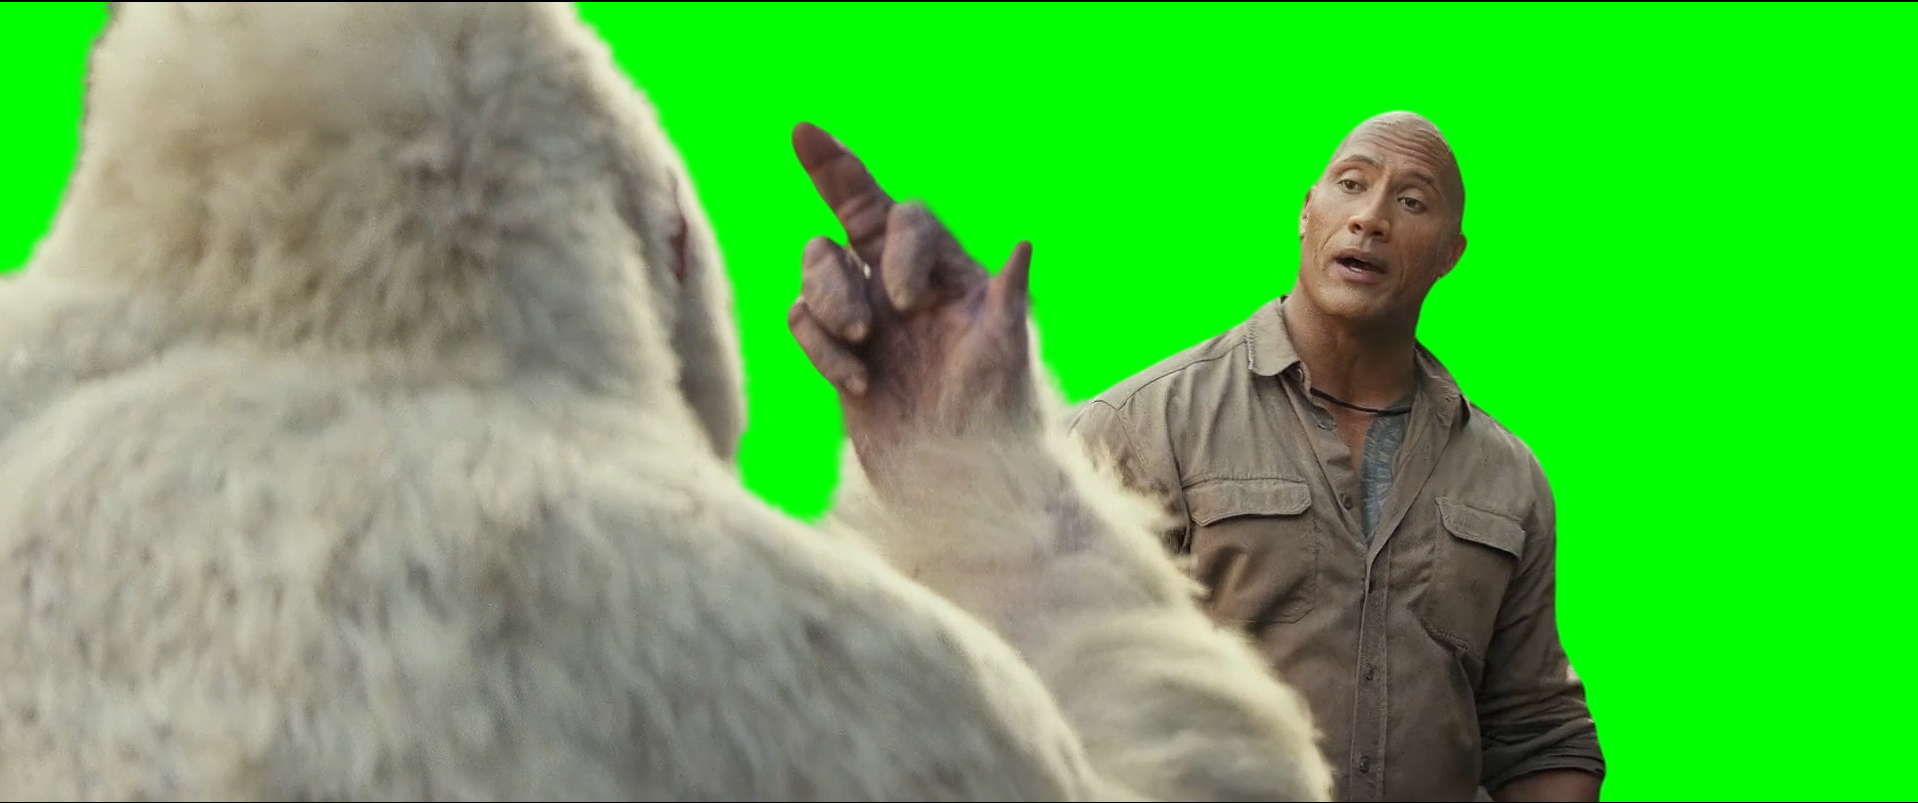 George Shows Middle Finger to The Rock meme - Rampage movie (Green Screen)